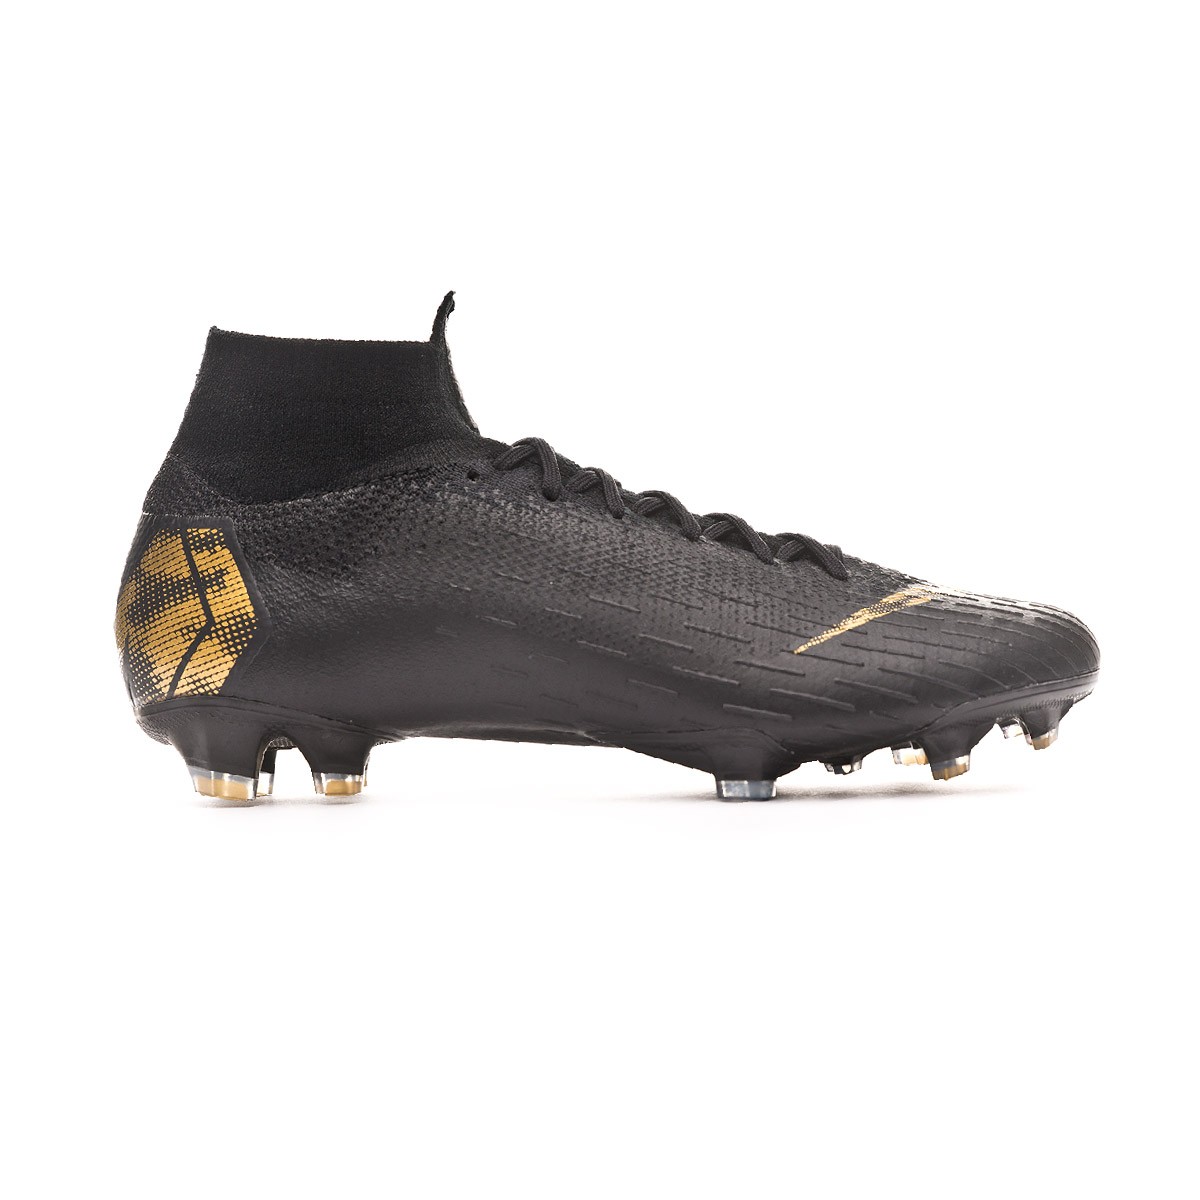 Buy Nike Mercurial Superfly 6 Elite FG Game Over Pack to.